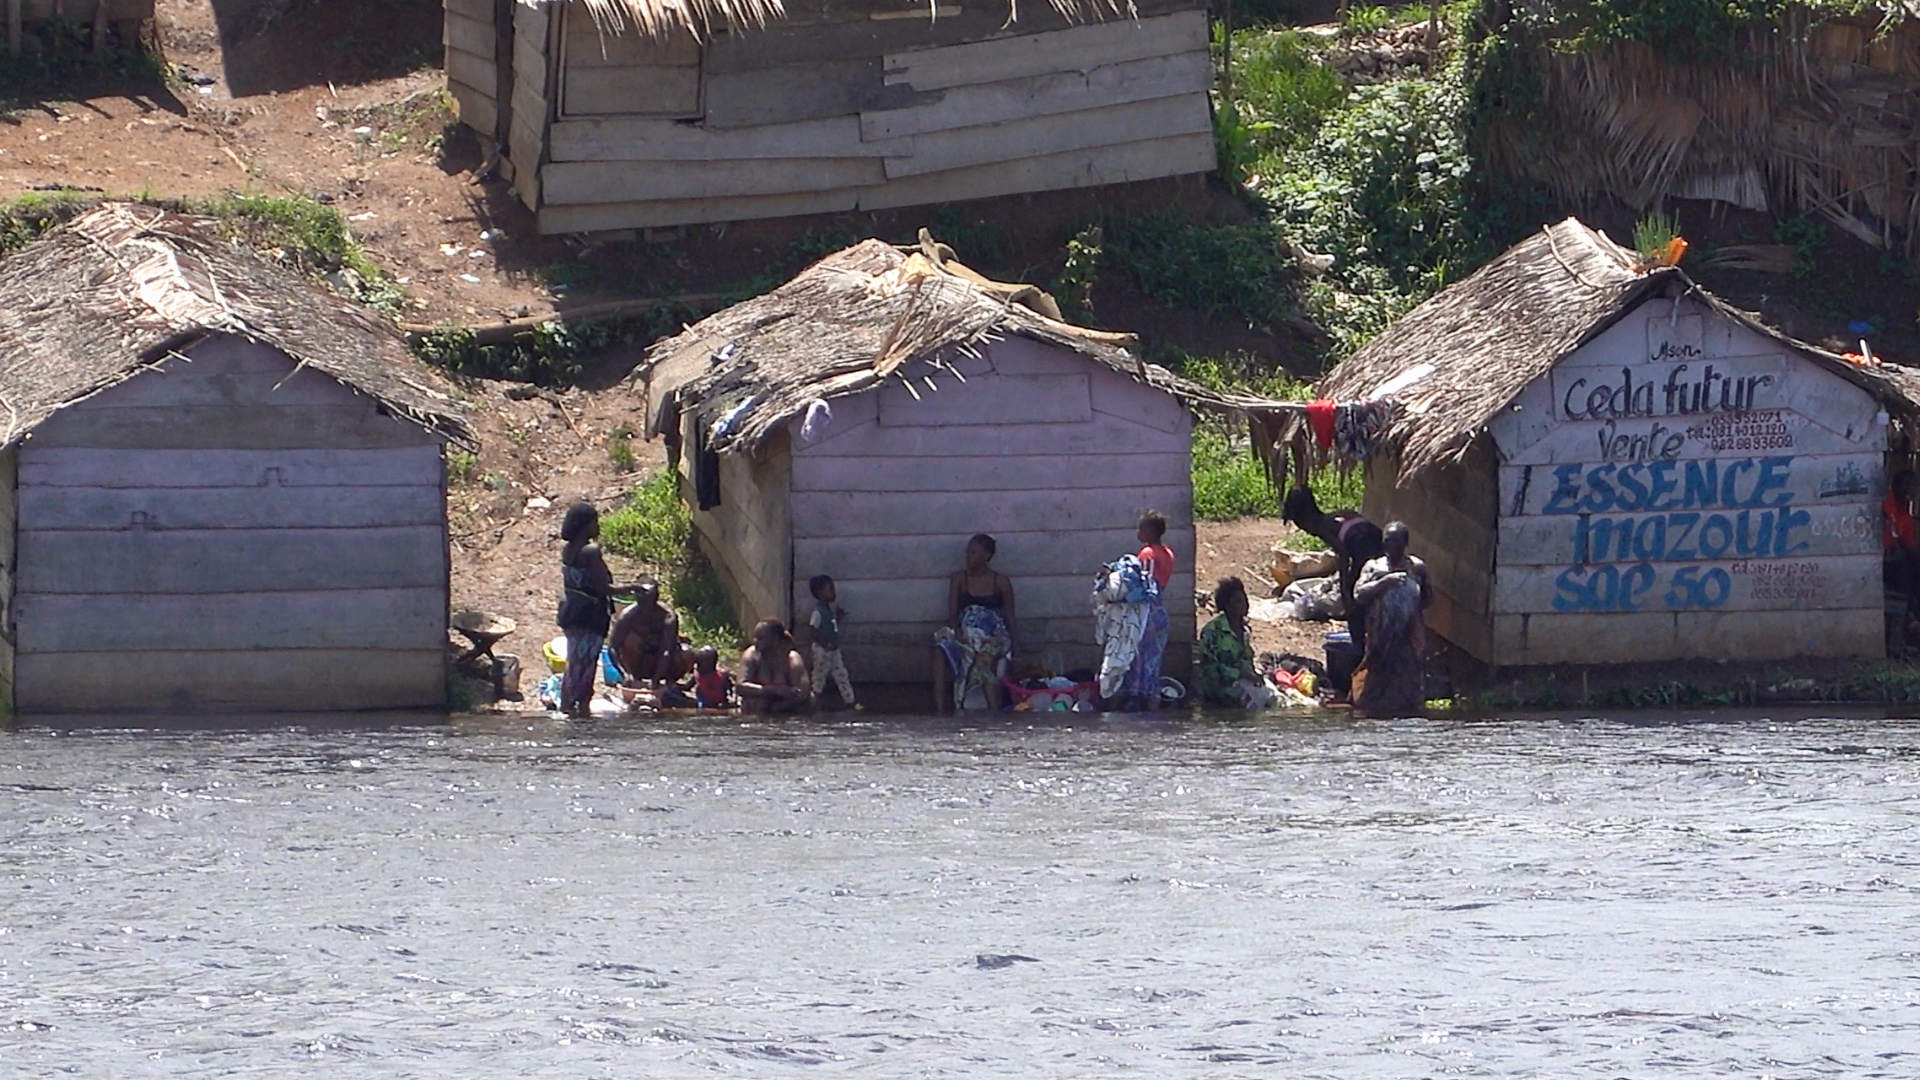 more developed village with women washing clothes in river